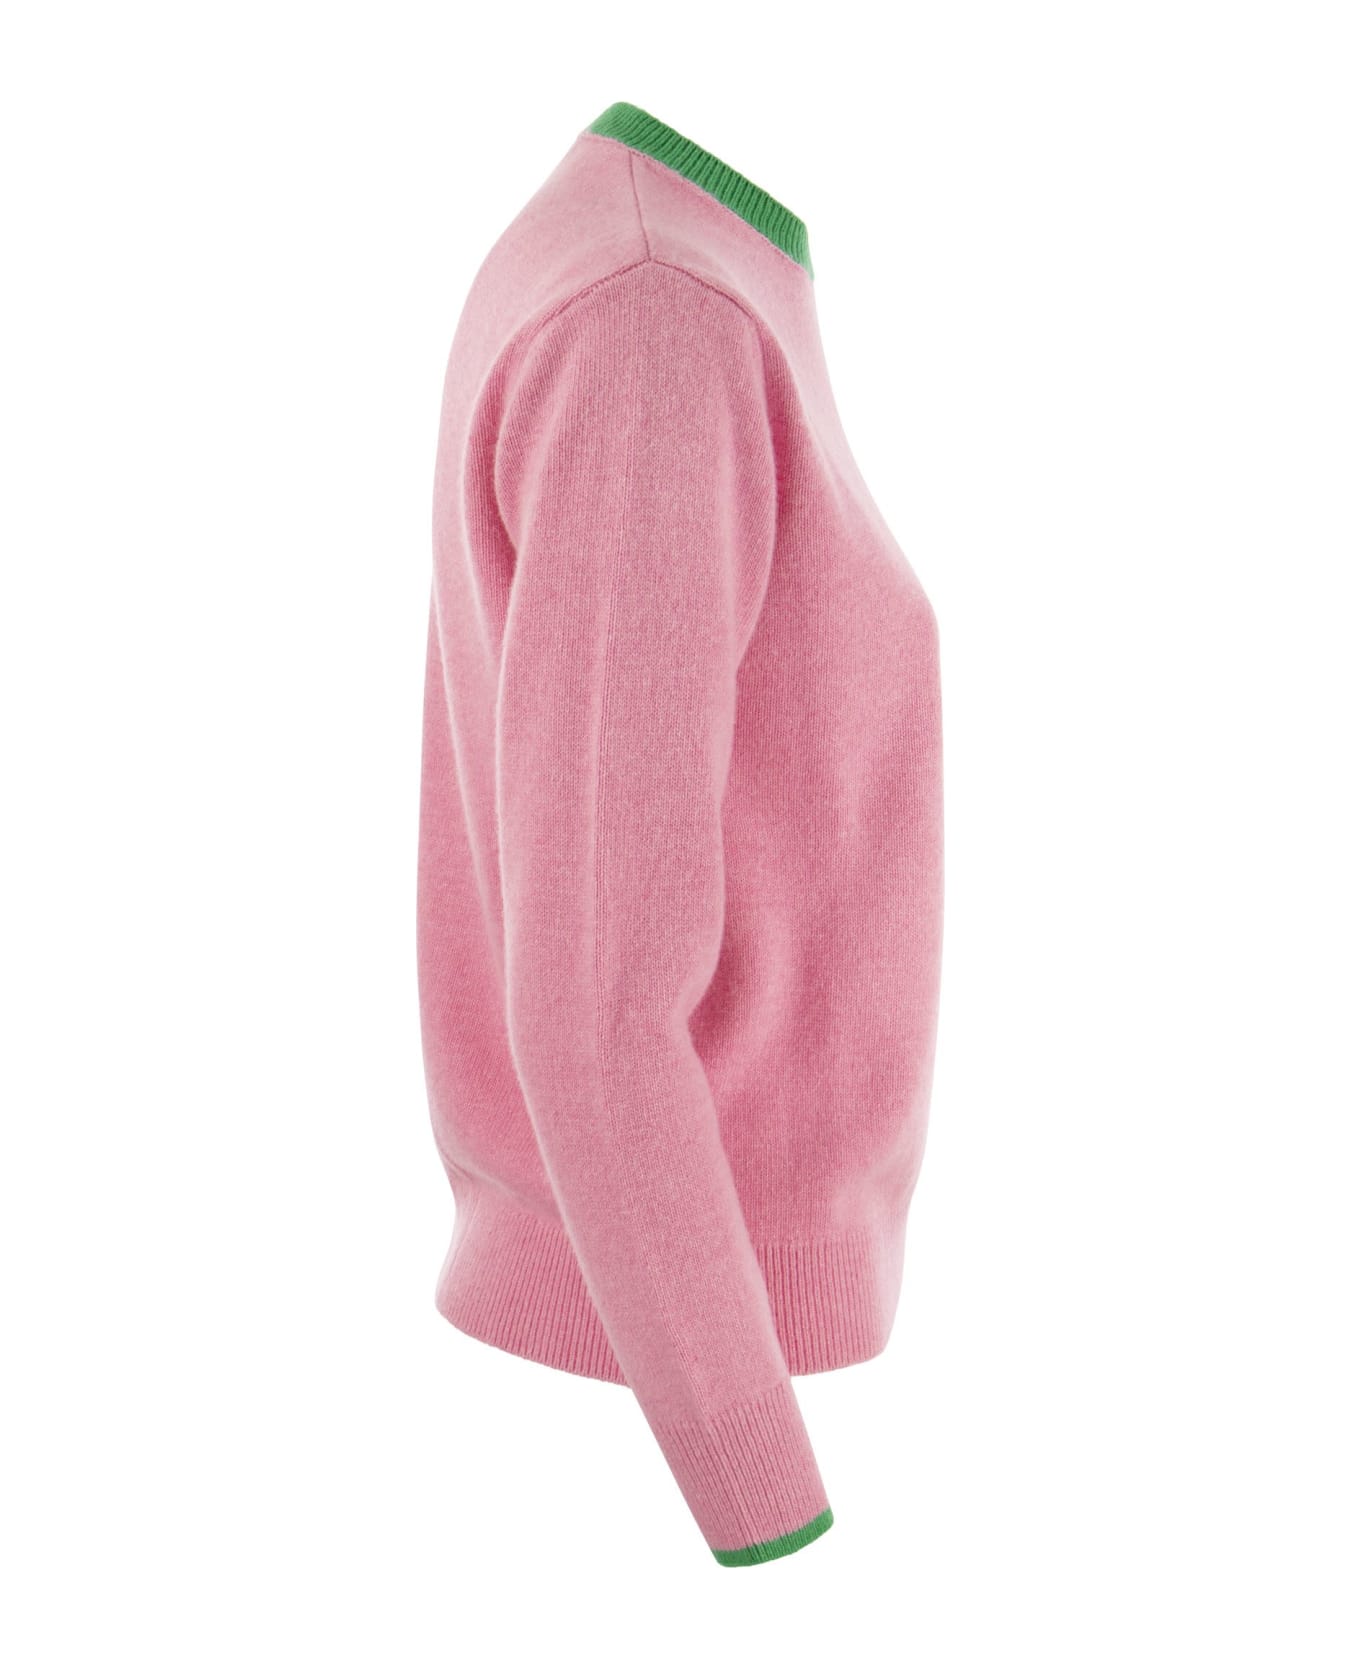 MC2 Saint Barth Wool And Cashmere Blend Jumper With Vodka Vs Yoga Embroidery - Pink